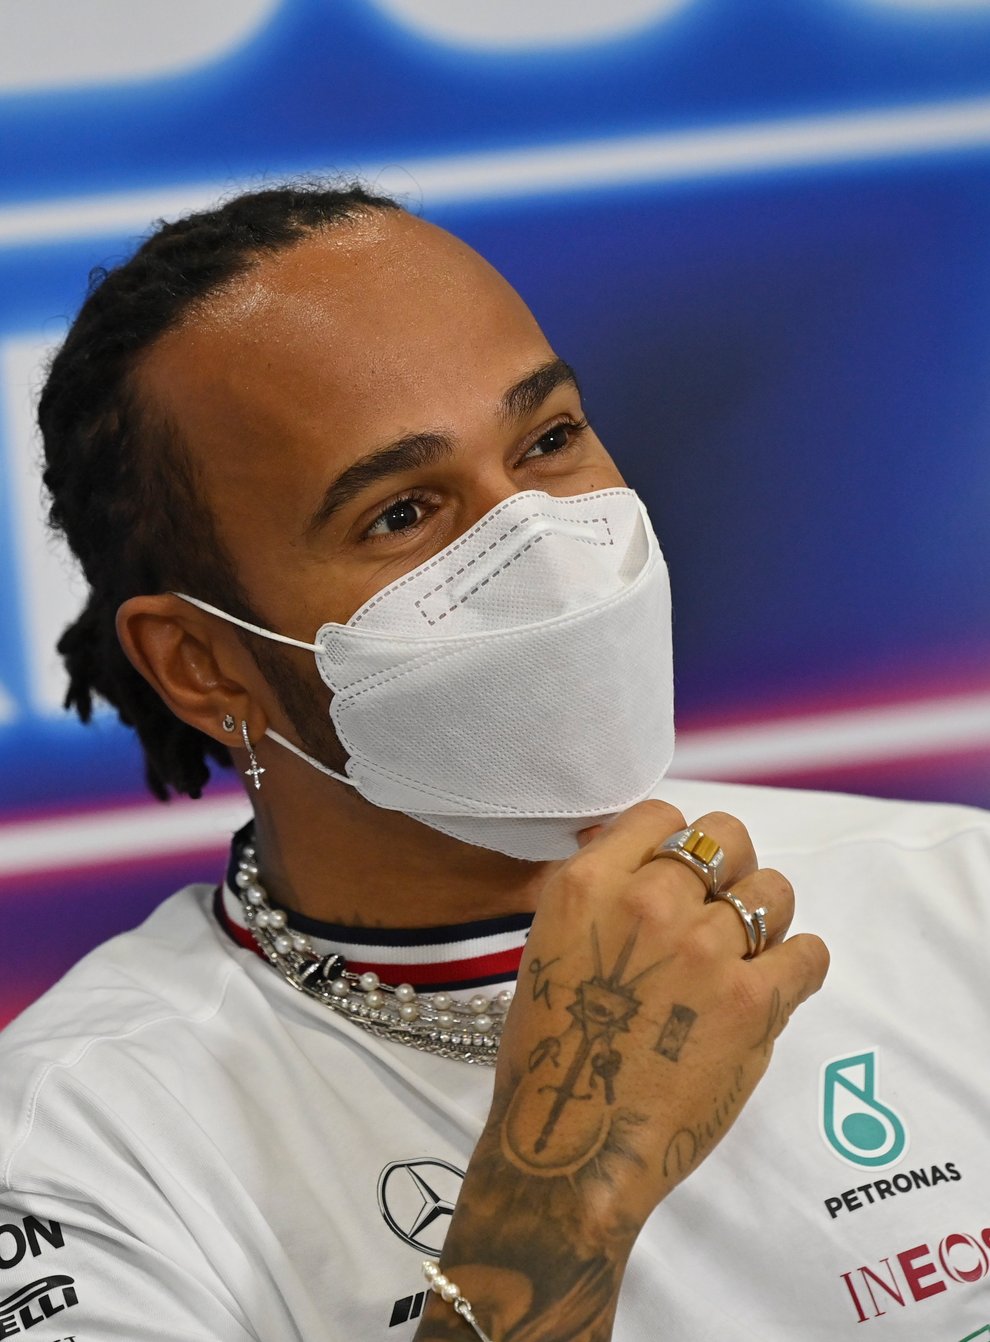 Lewis Hamilton wants more sportspeople to talk up against human rights issues. (Andej Isakovic/AP)